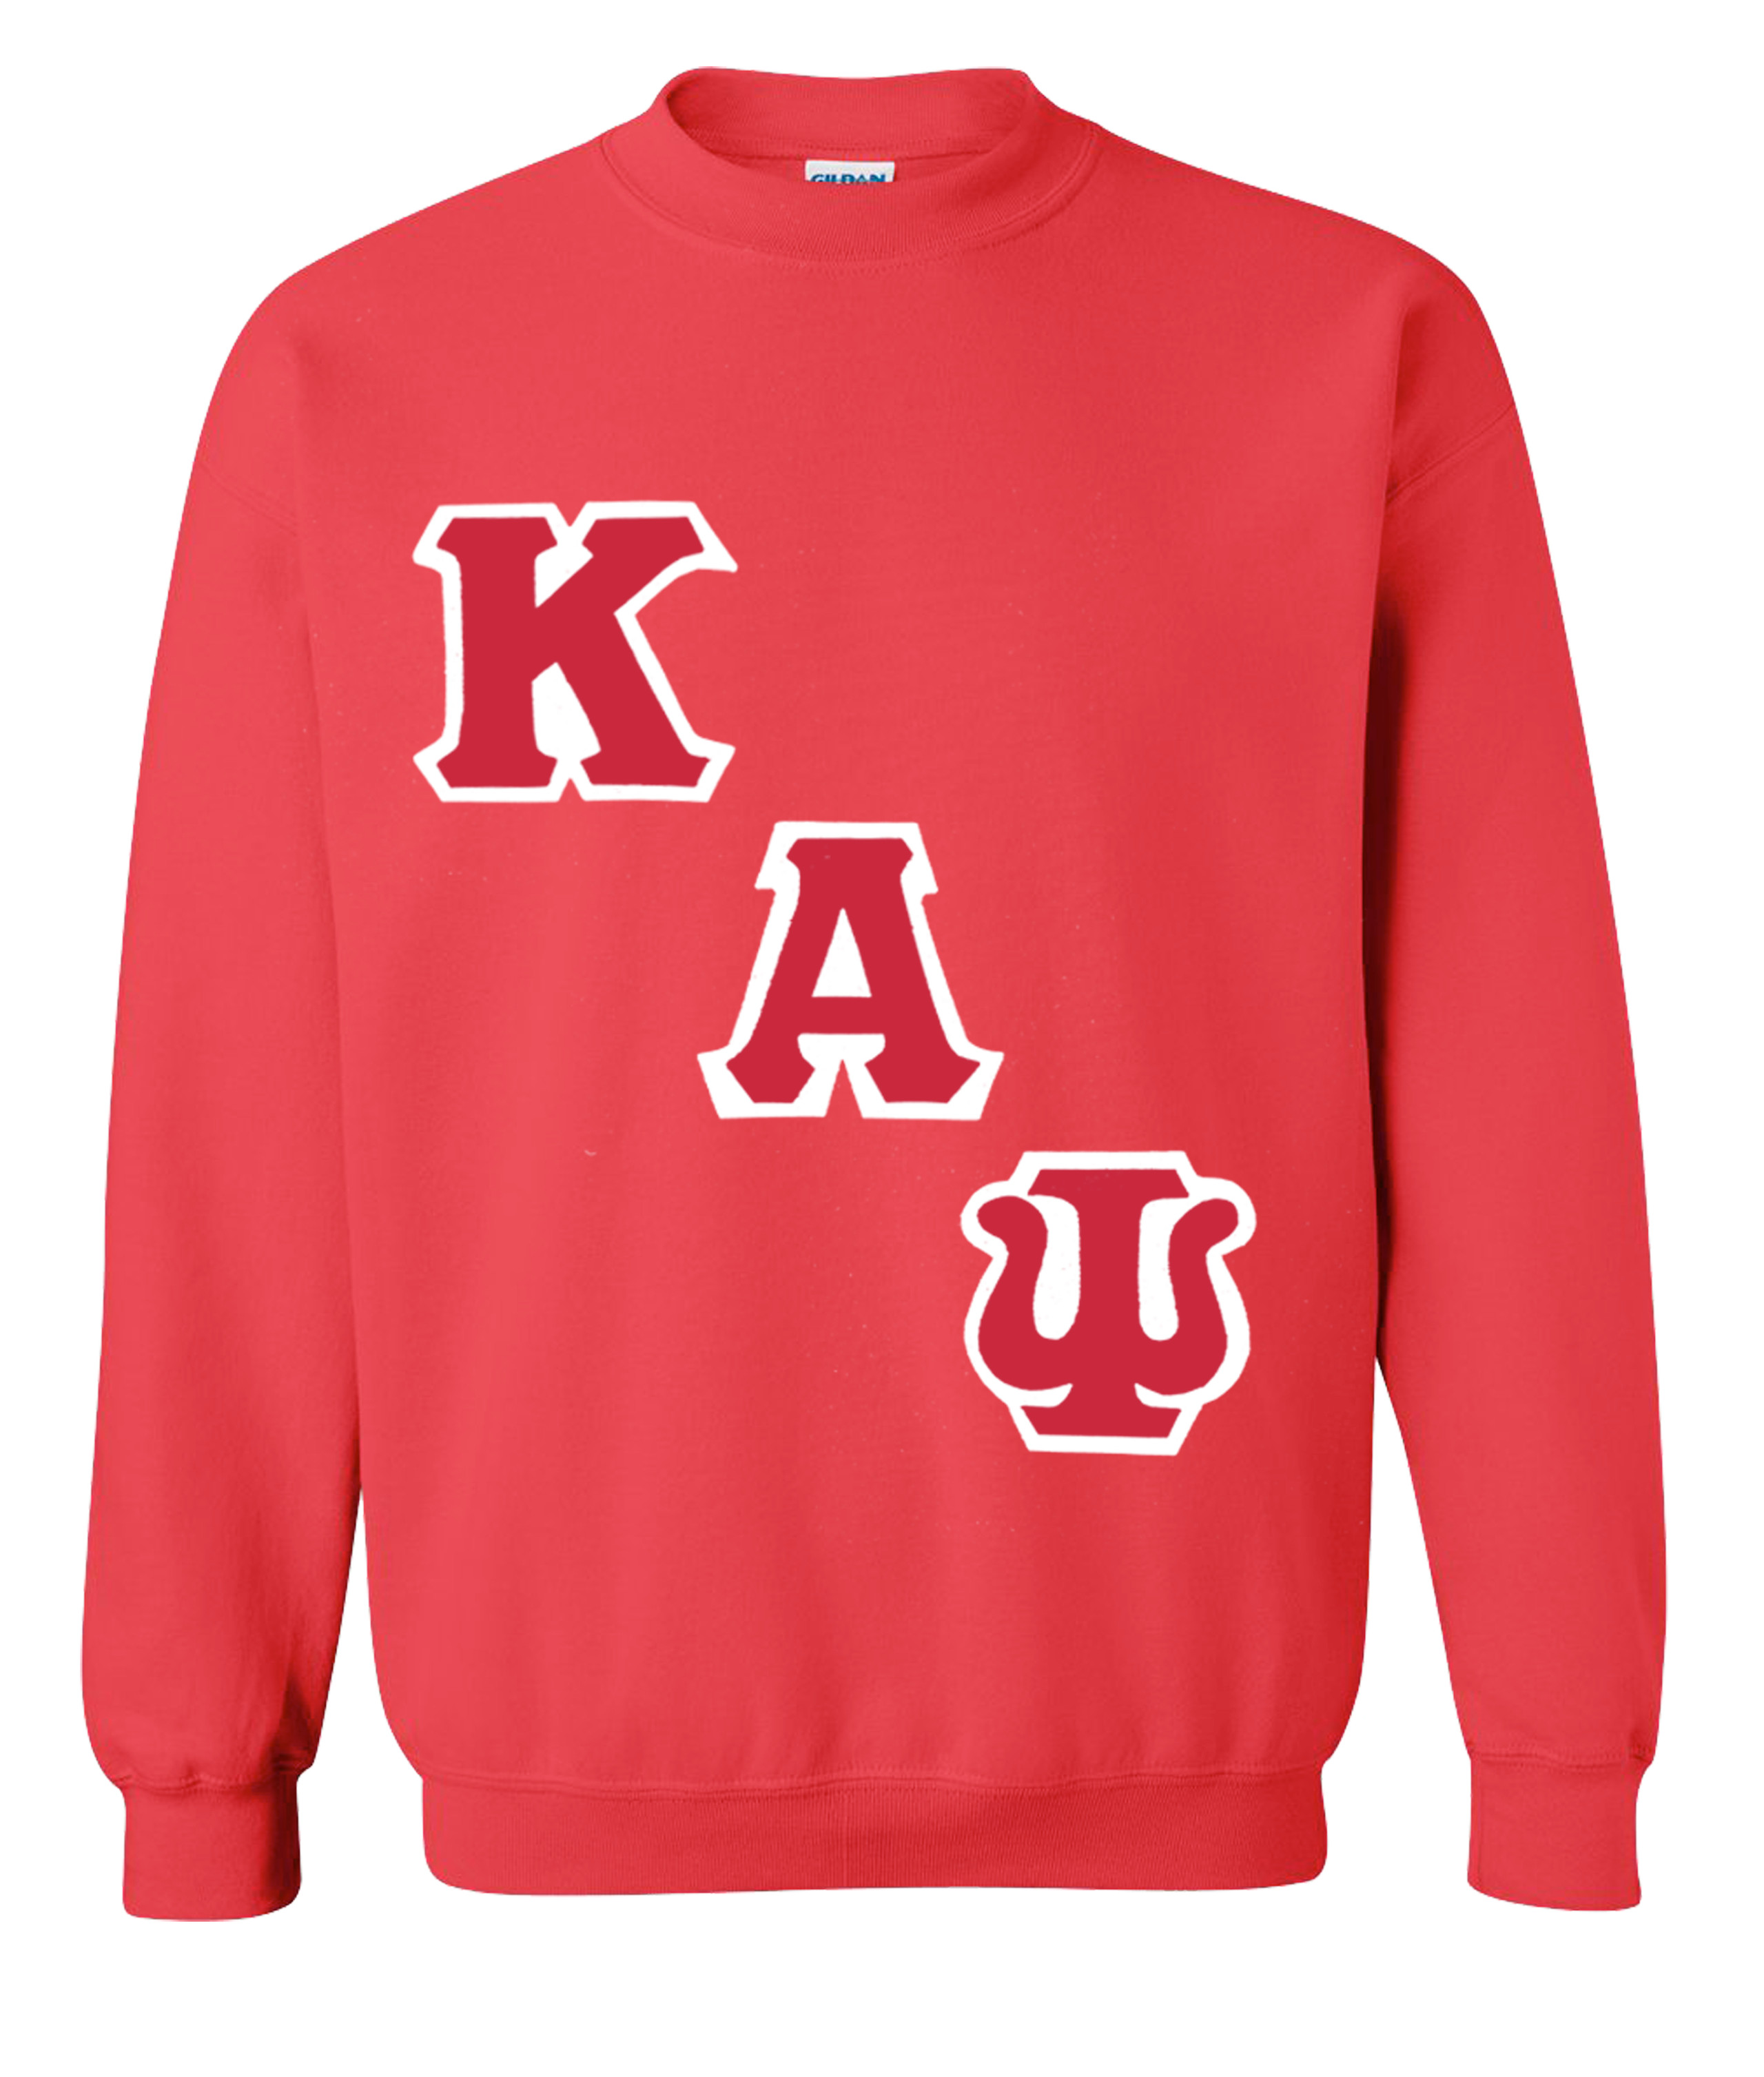 Kappa Alpha Psi - Sweaters - Deference Clothing